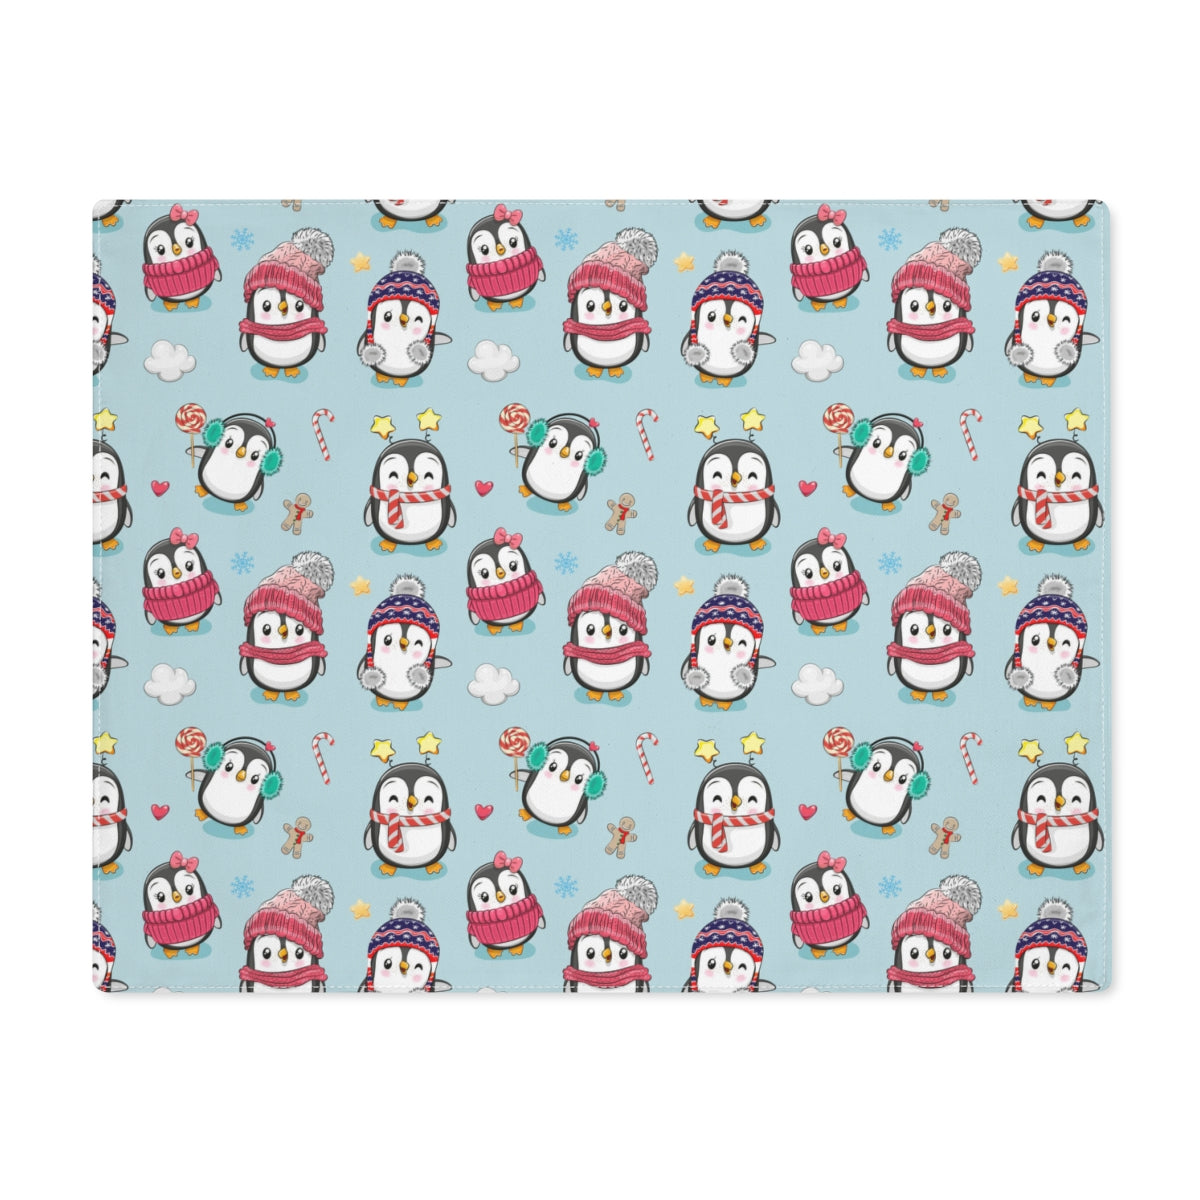 Penguins in Winter Clothes Placemat